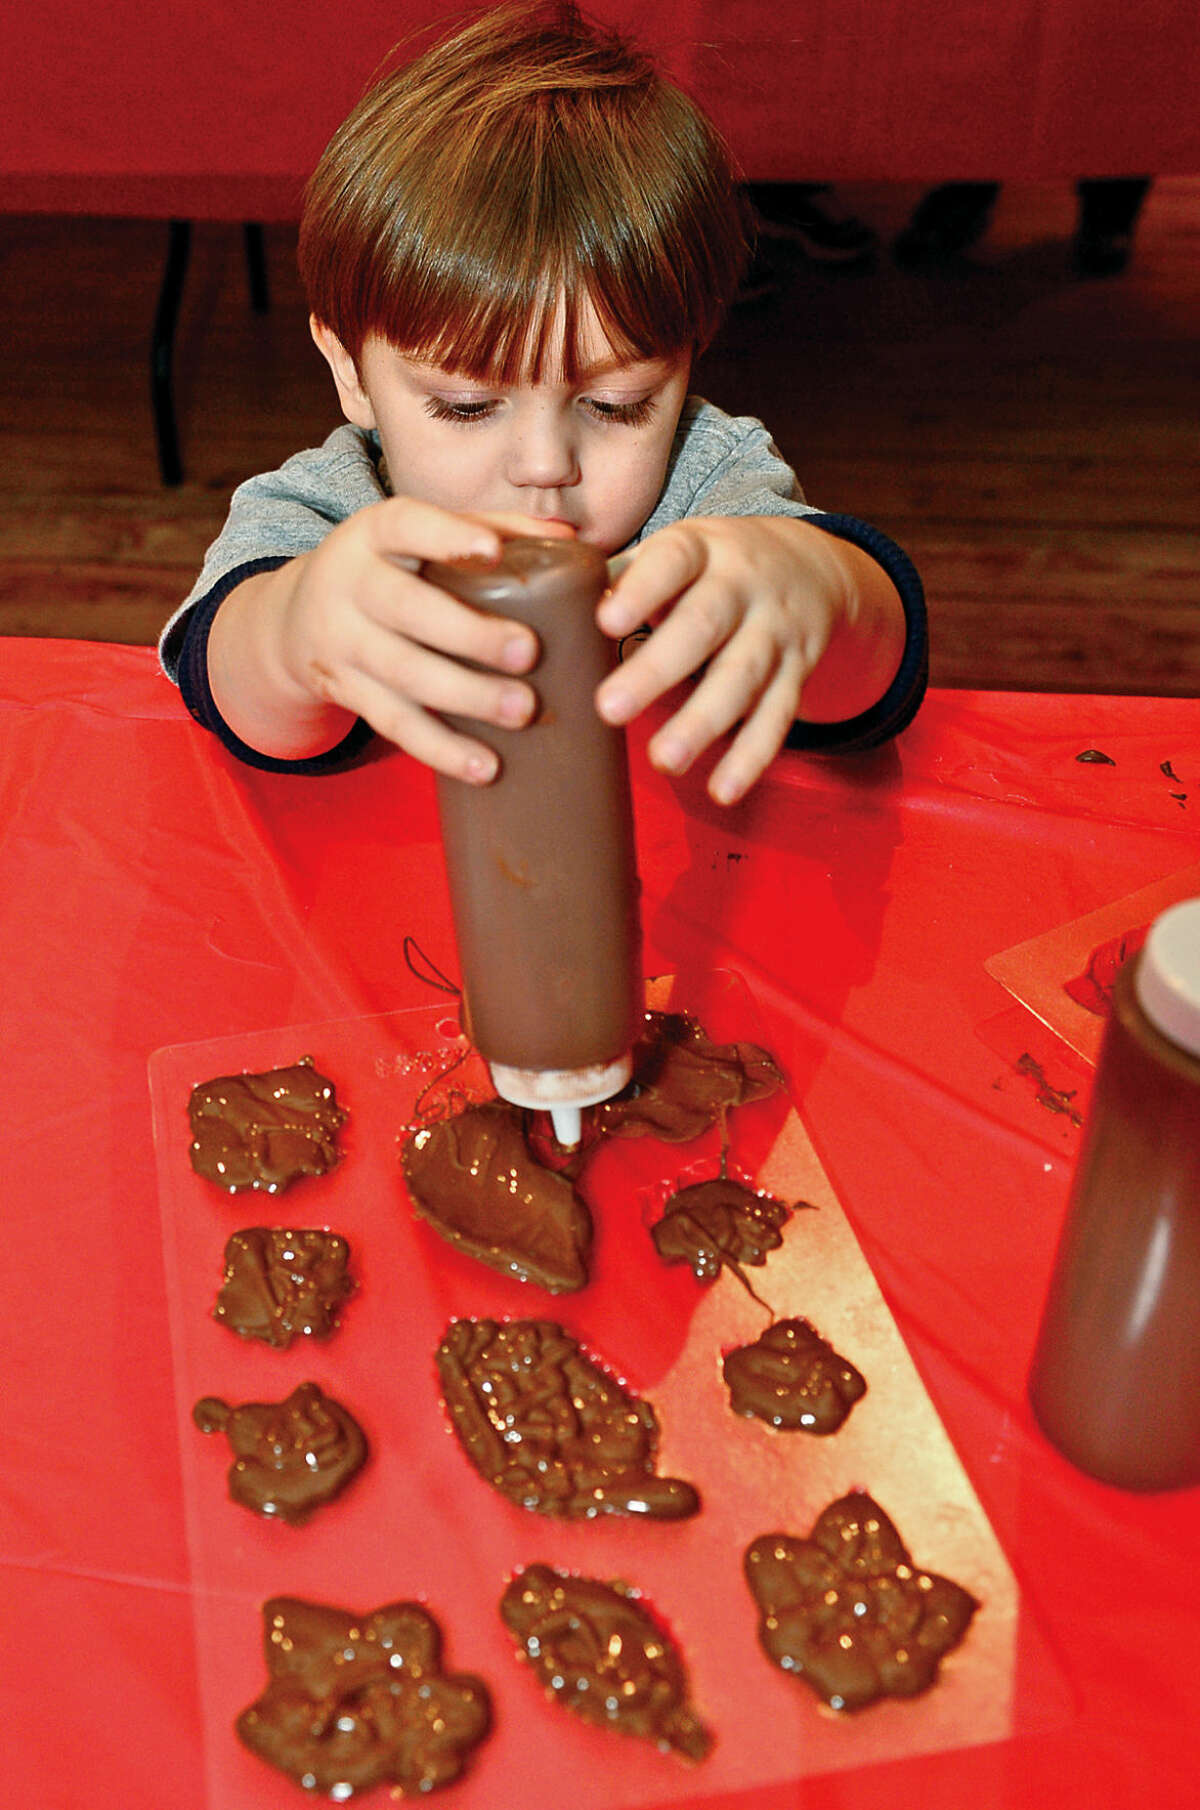 Hour photo / Erik Trautmann 2 year old Jack Burton makes chocolate during the Wilton Historical Society annual Valentine Chocolate-Making Workshop for kids in grades kindergarten through 8 Thursday. Program participants also made Valentines cards box to put the chocolates in. The one-hour session made use of an extensive collection of small, charming chocolate mold featuring hearts, a multitude of animals, and stars.